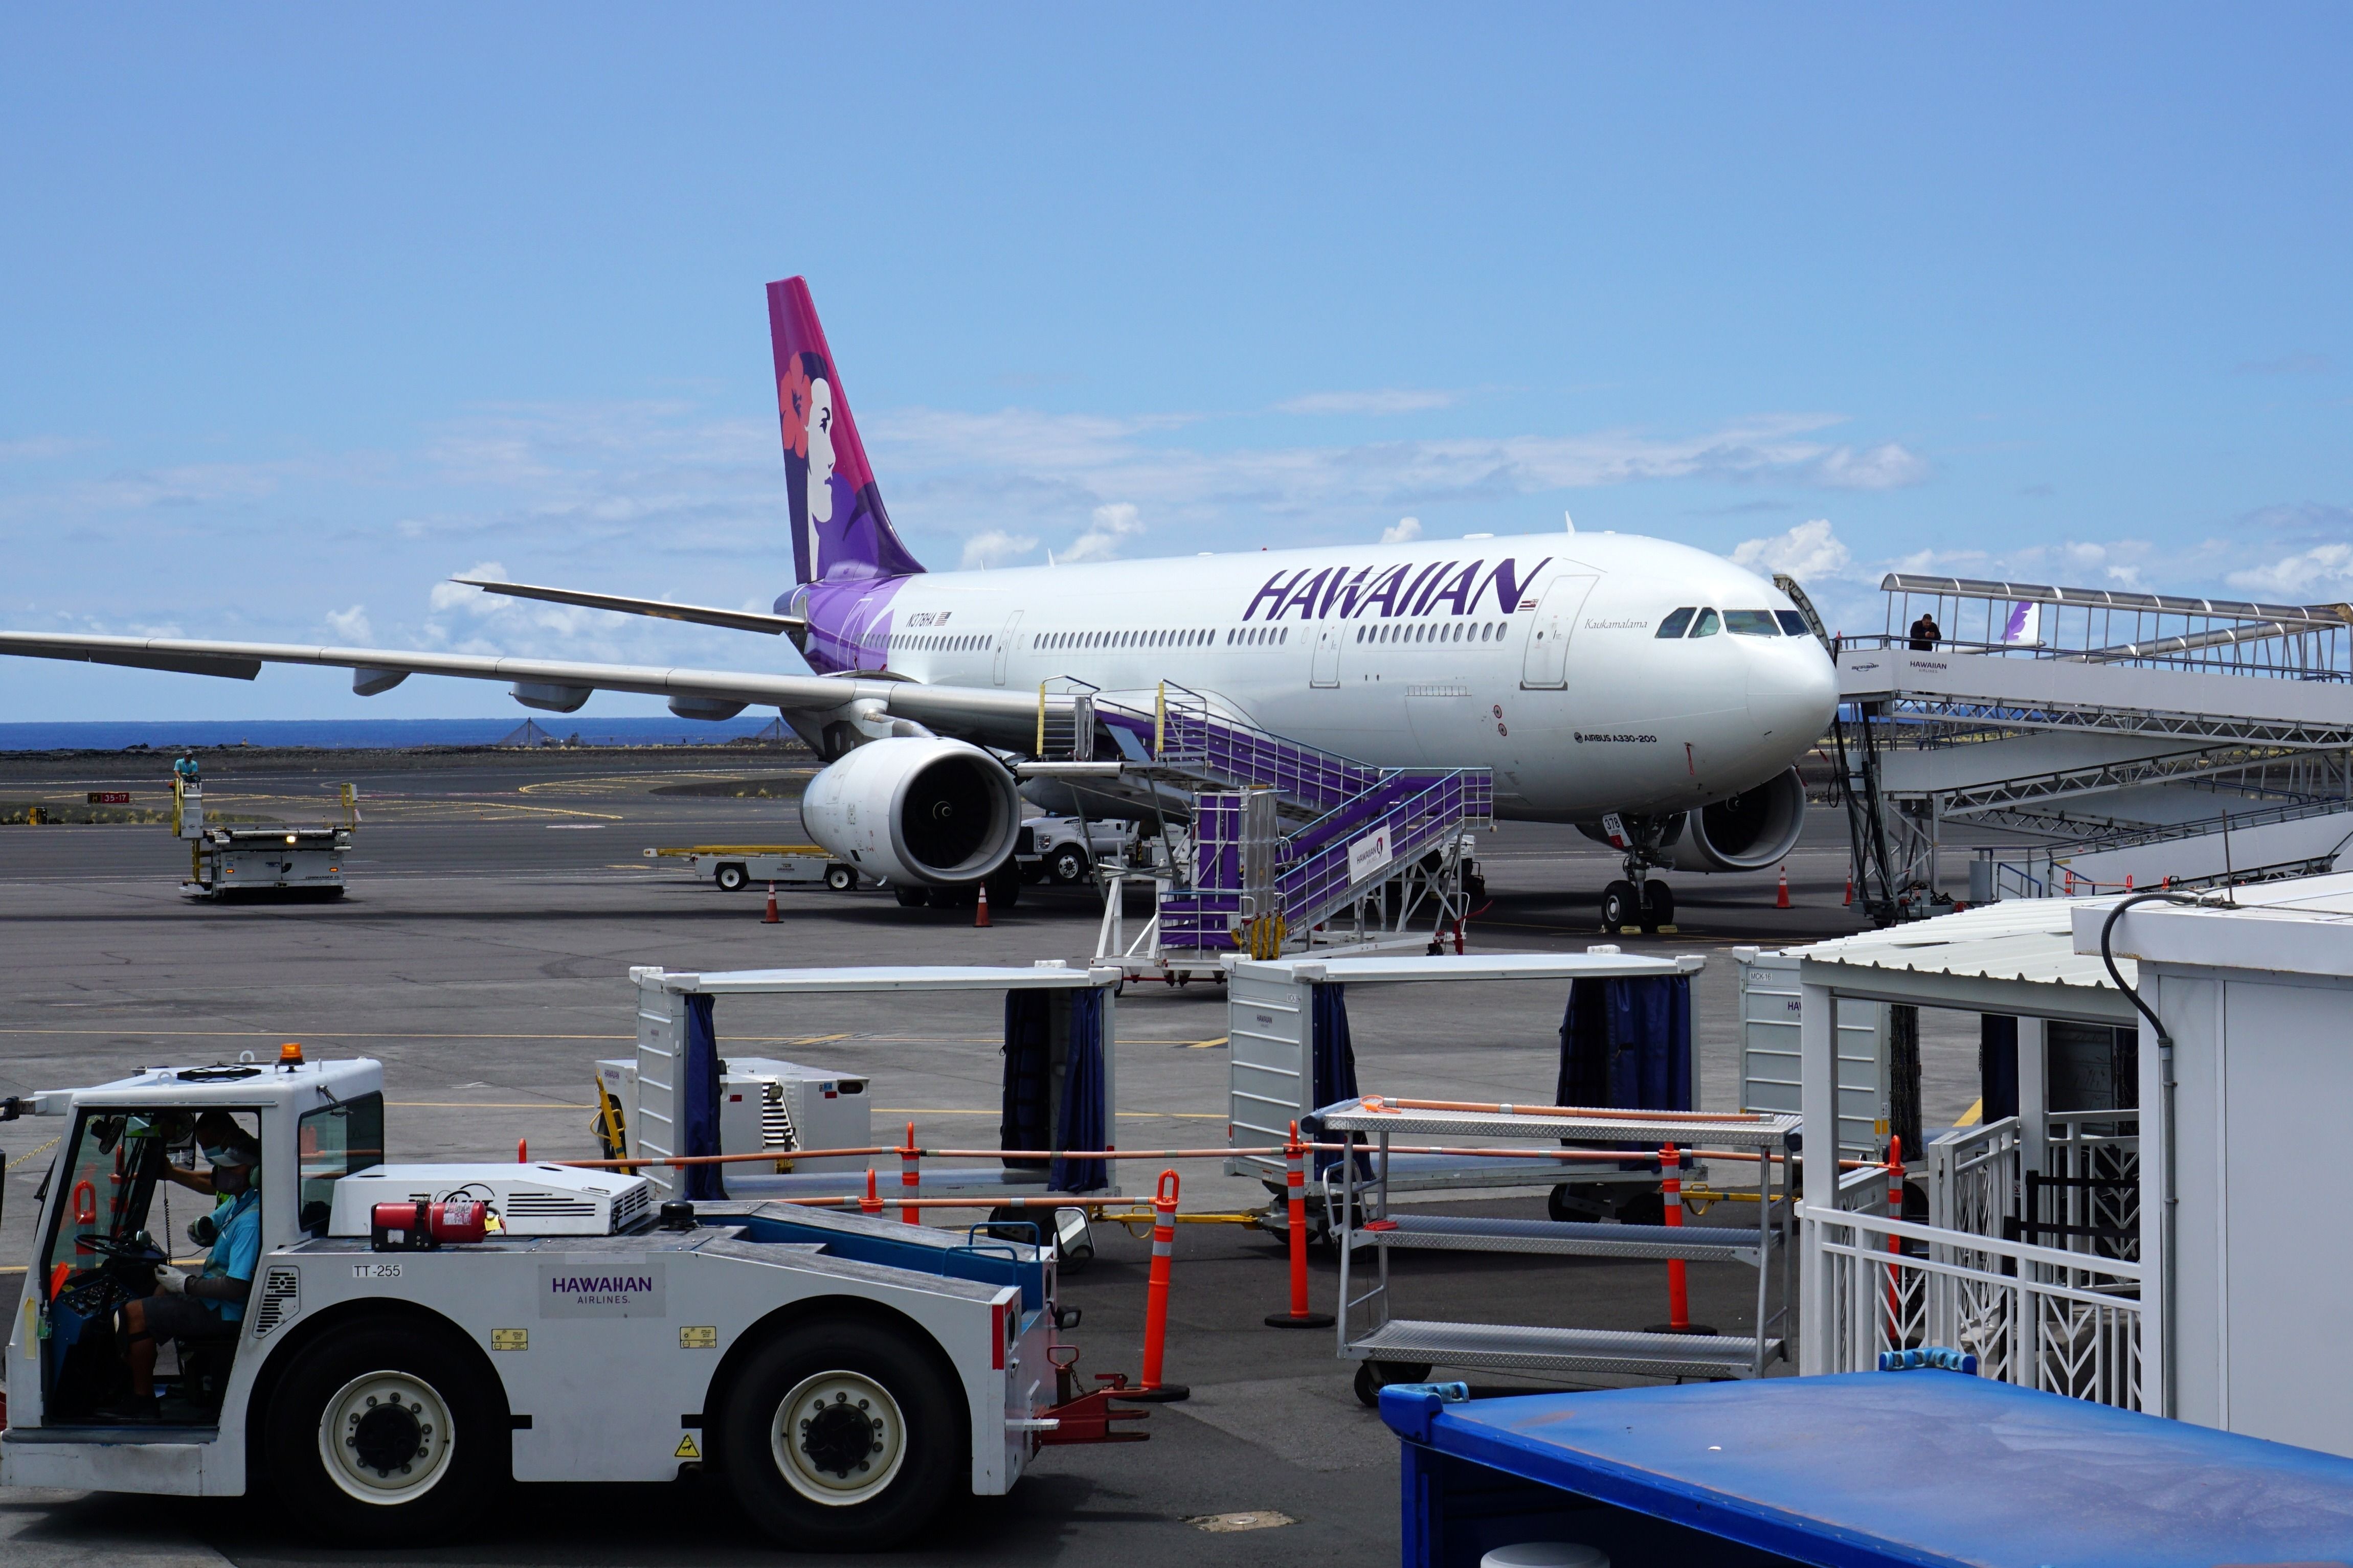 Hawaiian Airlines A330-200 pulling into the gate at Kona International Airport.